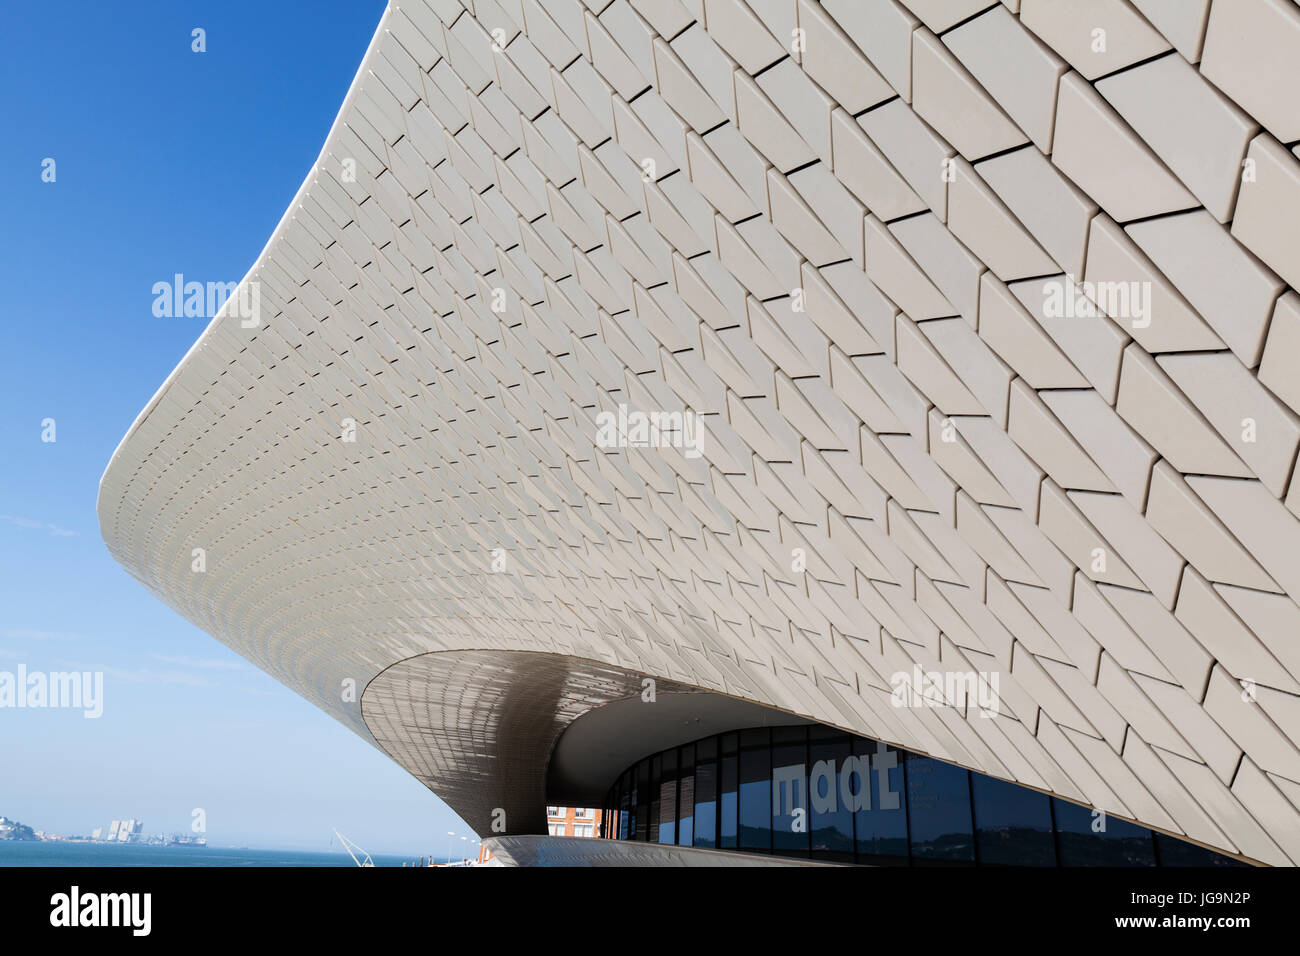 MAAT, the Museum of Art, Architecture and Technology in Lisbon, Portugal. Stock Photo